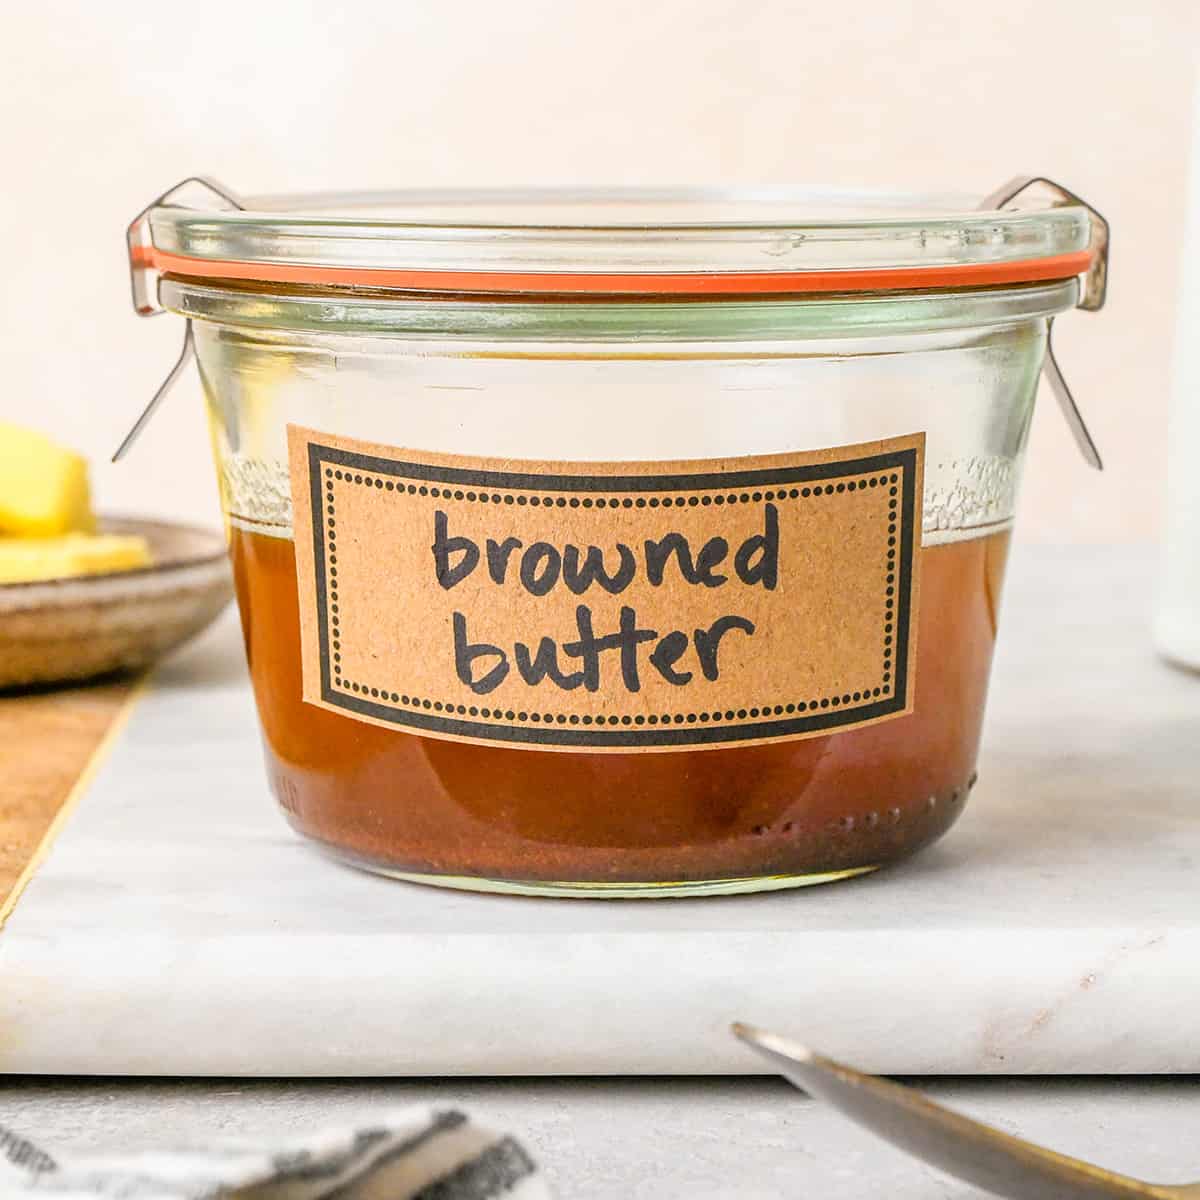 brown butter in a jar labeled "browned butter"